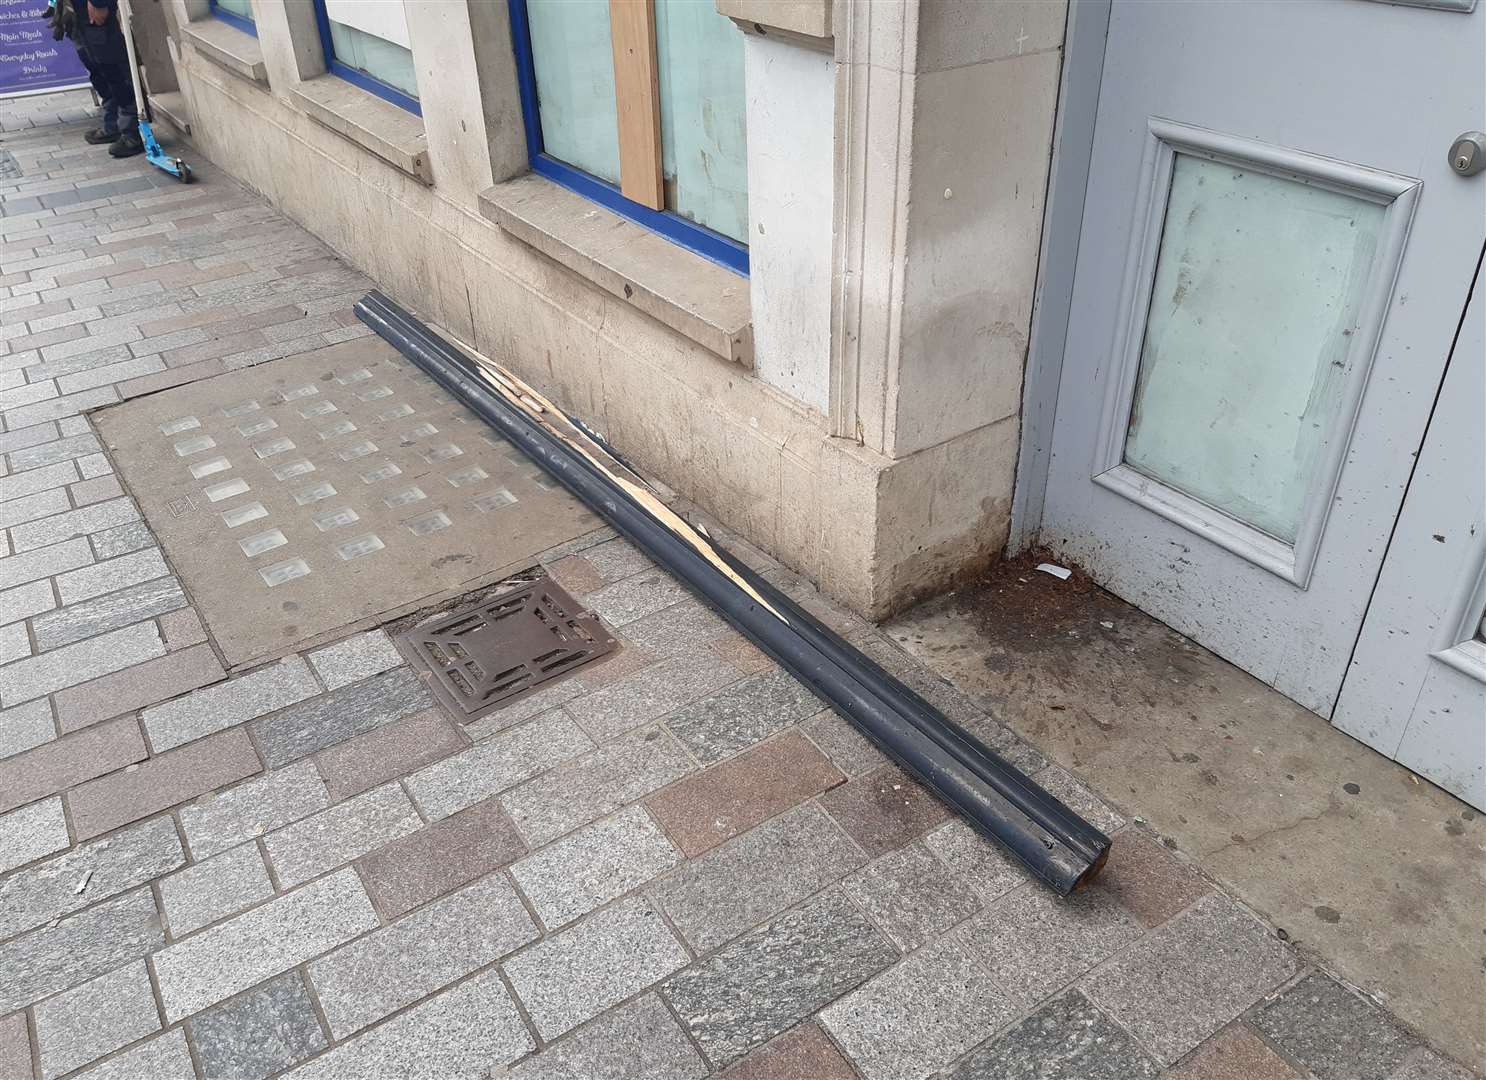 A length of timber which fell from a building in Maidstone High Street, narrowly missing people waiting at a bus stop